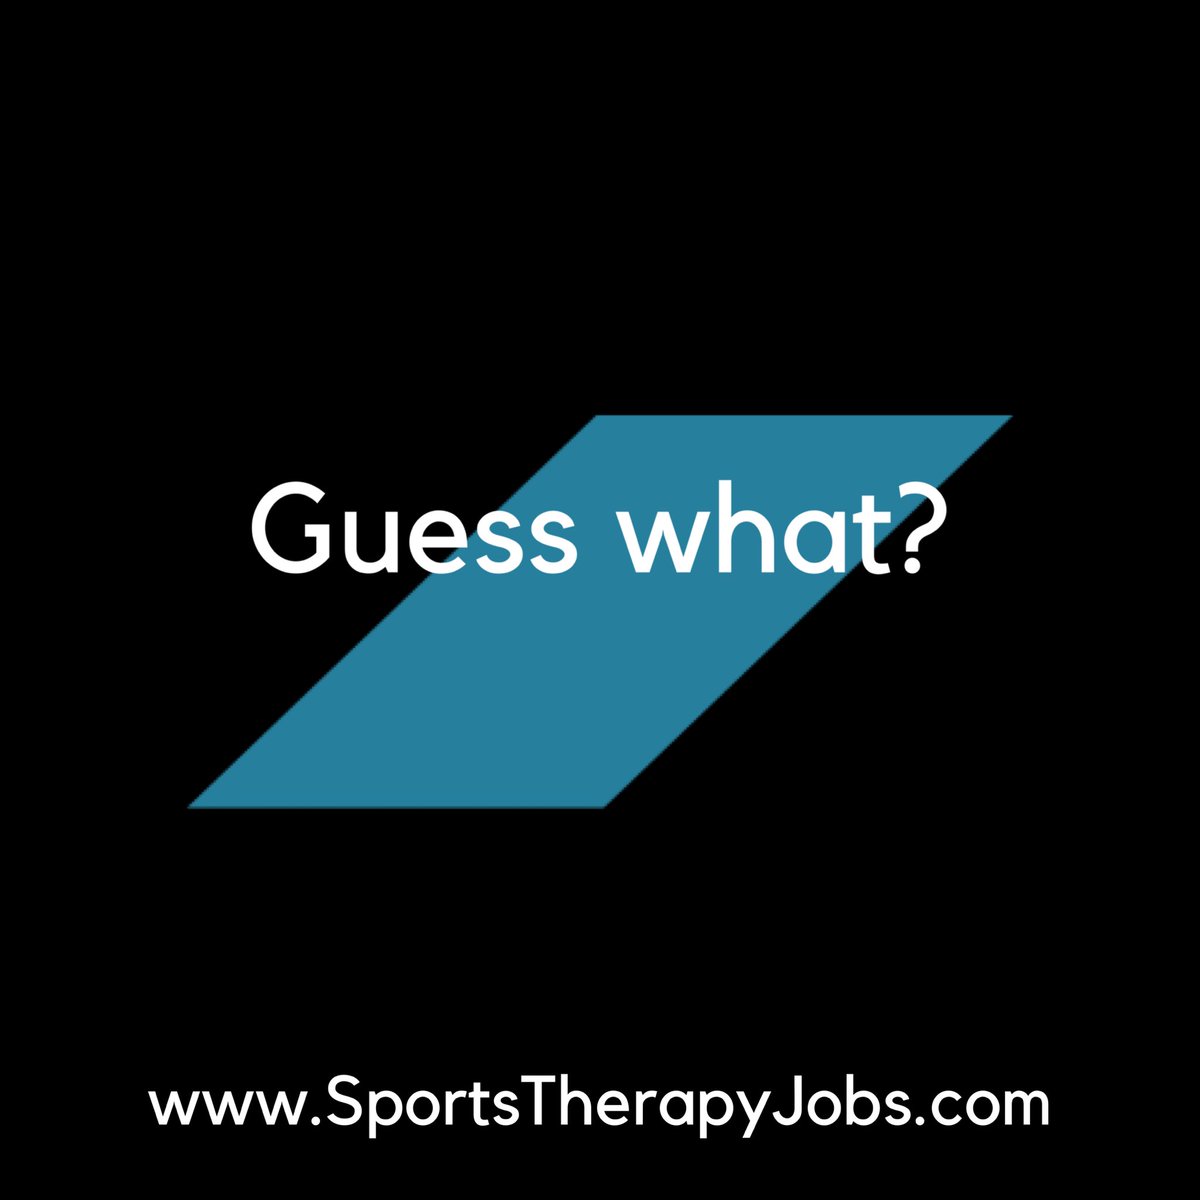 W H A T ?

You are not going to be surprised. More jobs have been added #SportsTherapyJobs